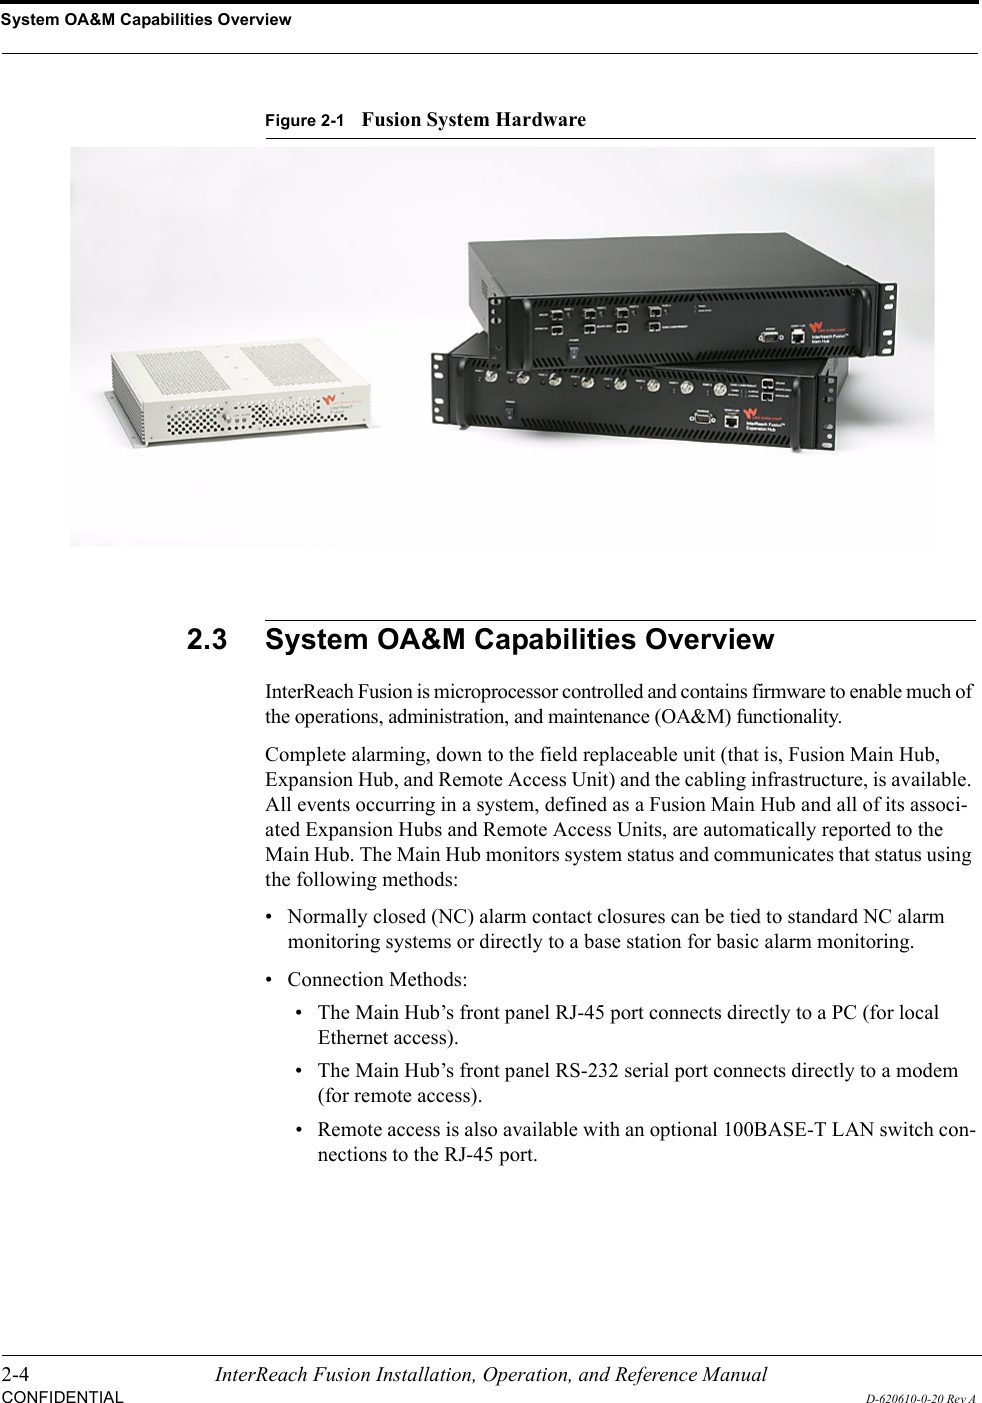 System OA&amp;M Capabilities Overview2-4 InterReach Fusion Installation, Operation, and Reference ManualCONFIDENTIALD-620610-0-20 Rev AFigure 2-1Fusion System Hardware2.3 System OA&amp;M Capabilities OverviewInterReach Fusion is microprocessor controlled and contains firmware to enable much of the operations, administration, and maintenance (OA&amp;M) functionality.Complete alarming, down to the field replaceable unit (that is, Fusion Main Hub, Expansion Hub, and Remote Access Unit) and the cabling infrastructure, is available. All events occurring in a system, defined as a Fusion Main Hub and all of its associ-ated Expansion Hubs and Remote Access Units, are automatically reported to the Main Hub. The Main Hub monitors system status and communicates that status using the following methods:• Normally closed (NC) alarm contact closures can be tied to standard NC alarm monitoring systems or directly to a base station for basic alarm monitoring.• Connection Methods:• The Main Hub’s front panel RJ-45 port connects directly to a PC (for local Ethernet access). • The Main Hub’s front panel RS-232 serial port connects directly to a modem (for remote access). • Remote access is also available with an optional 100BASE-T LAN switch con-nections to the RJ-45 port.